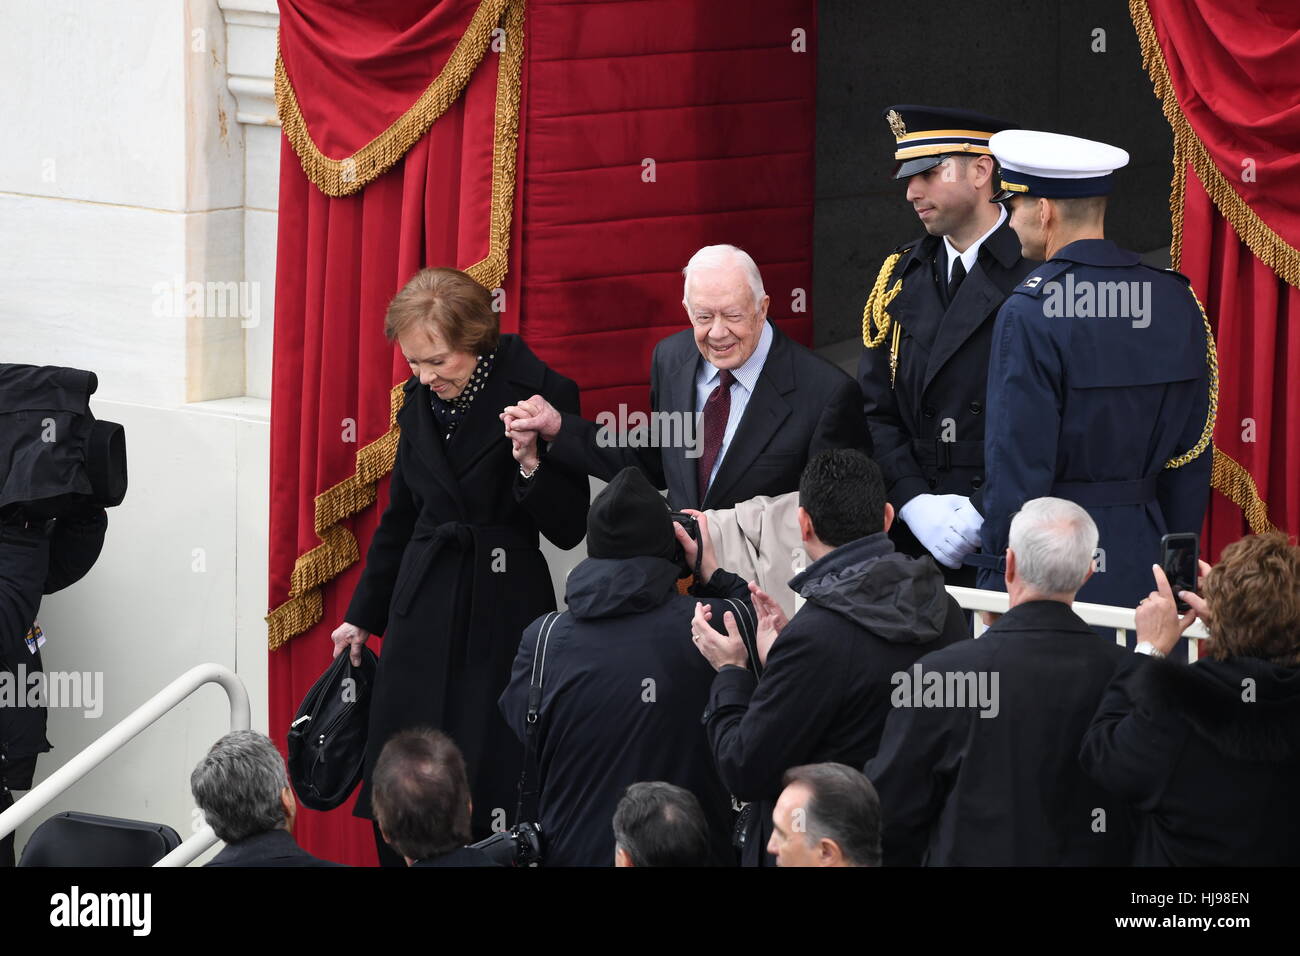 Former President Jimmy Carter and wife Rosalynn Carter arrive for the President Inaugural Ceremony on Capitol Hill January 20, 2017 in Washington, DC. Donald Trump became the 45th President of the United States in the ceremony. Stock Photo